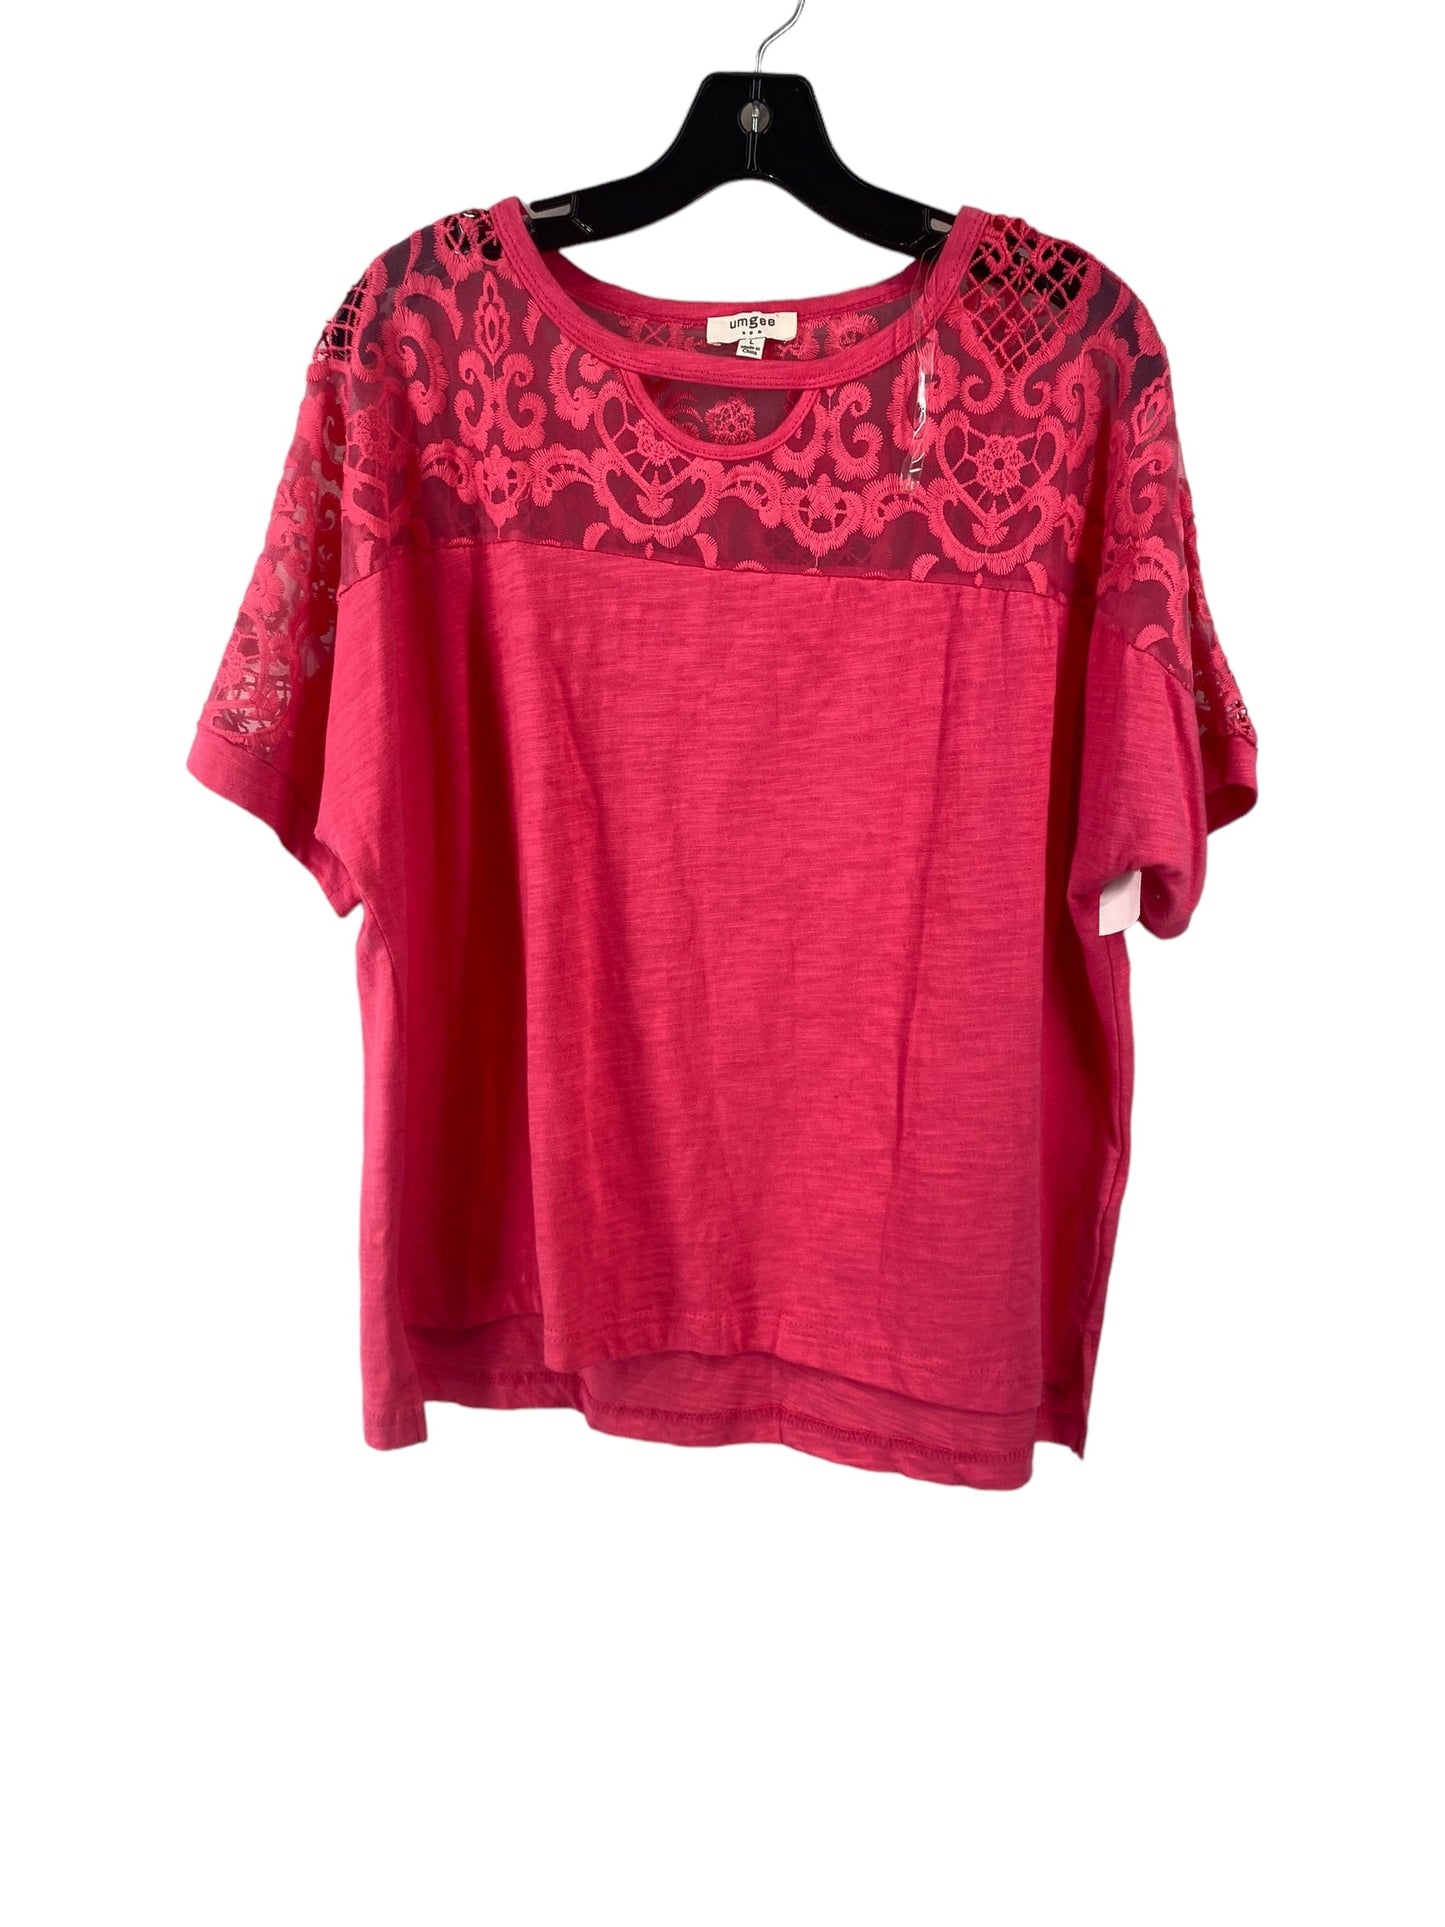 Pink Top Short Sleeve Umgee, Size L